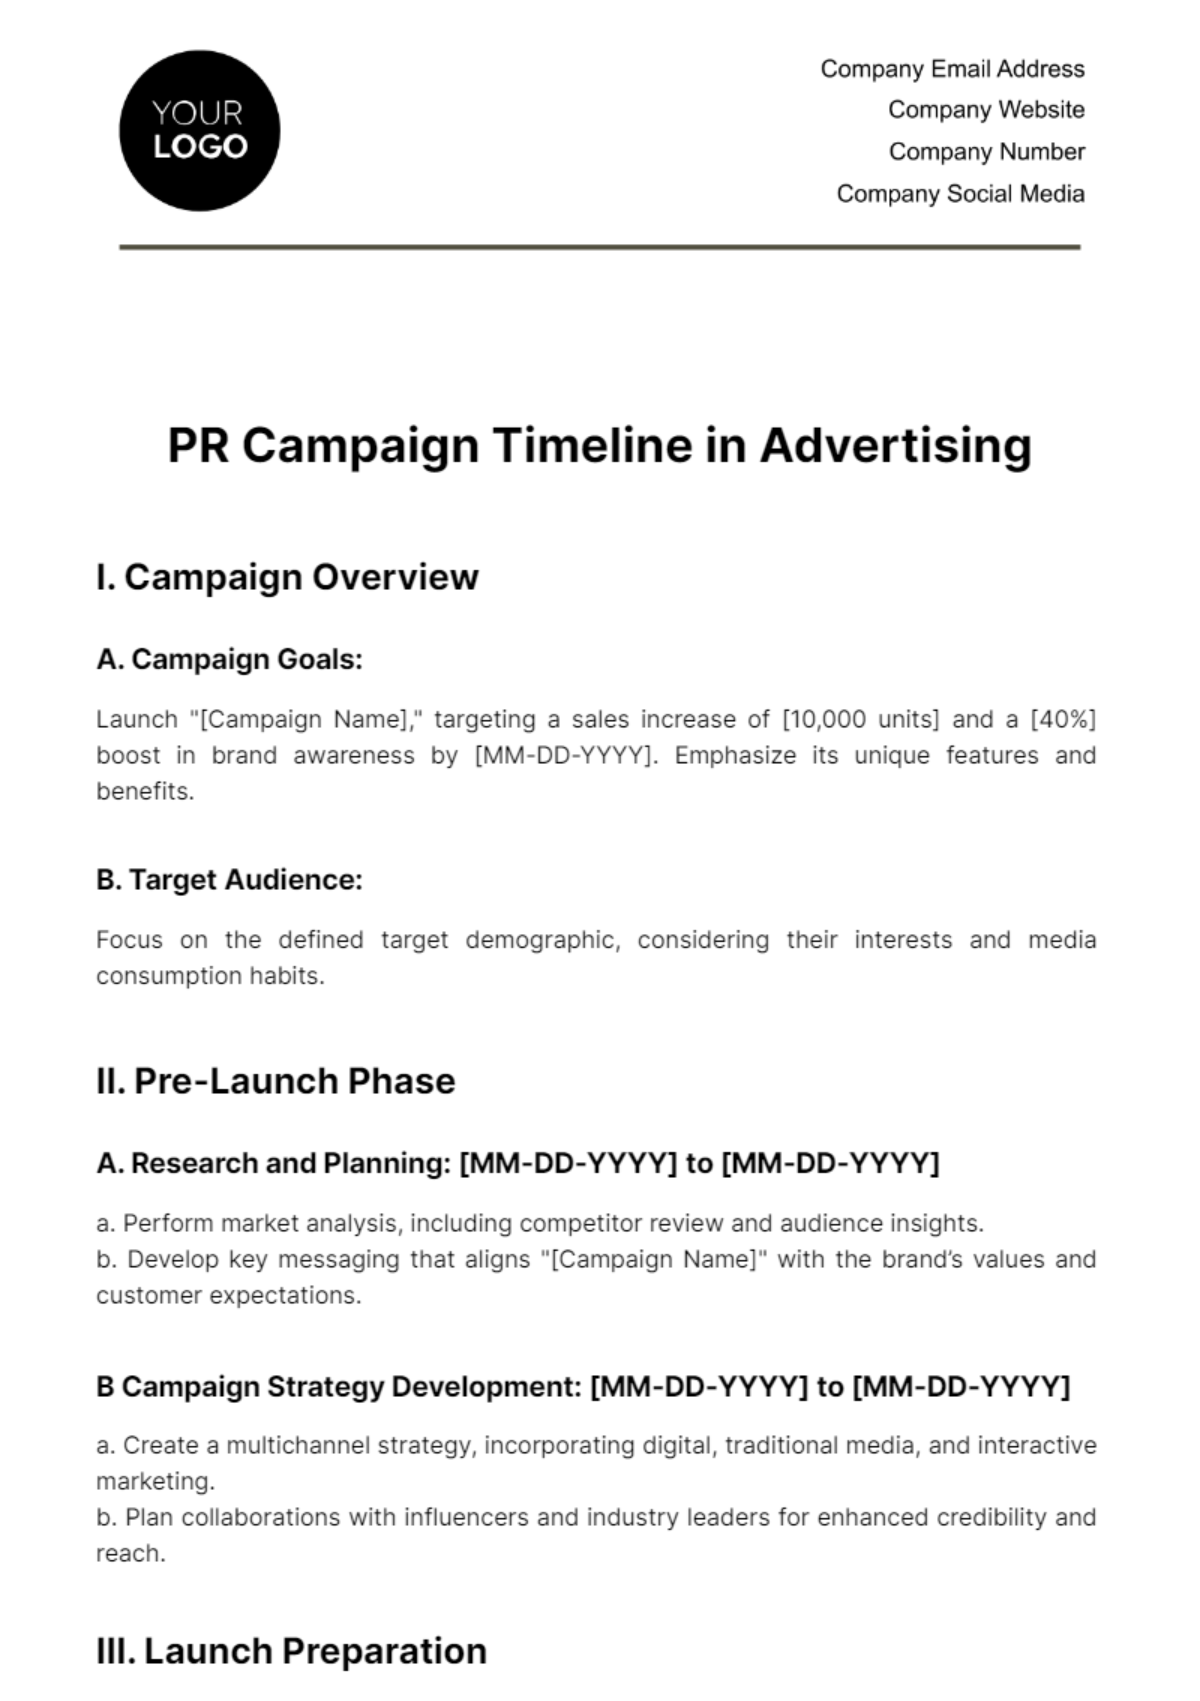 Free PR Campaign Timeline in Advertising Template